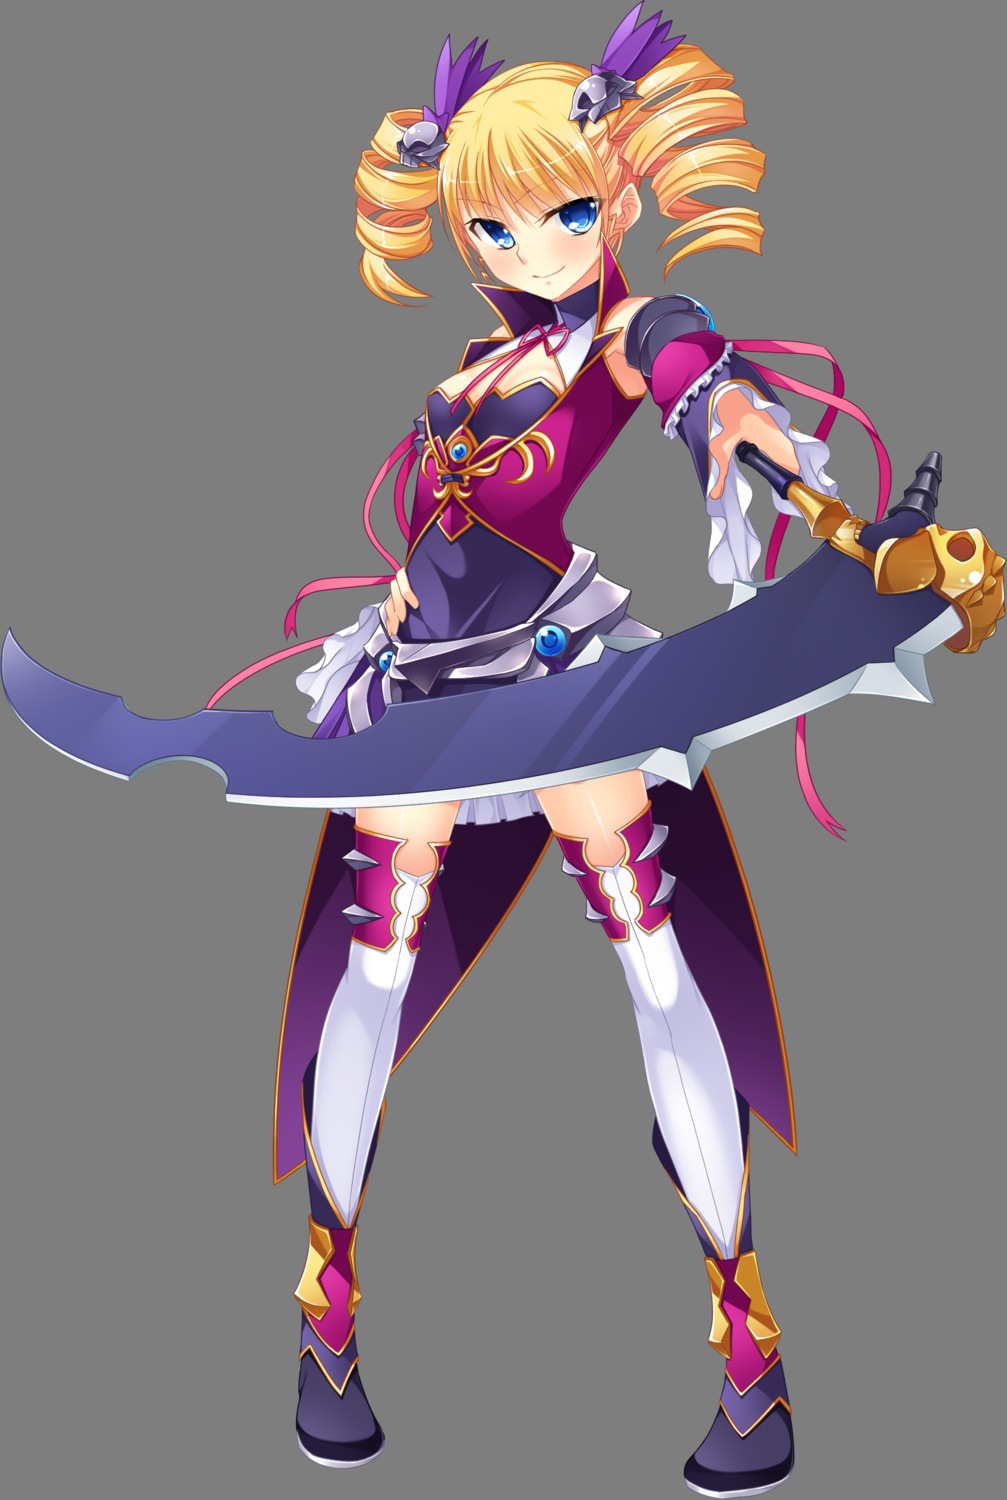 armor baseson cleavage kantaka koihime_musou sousou thighhighs transparent_png weapon